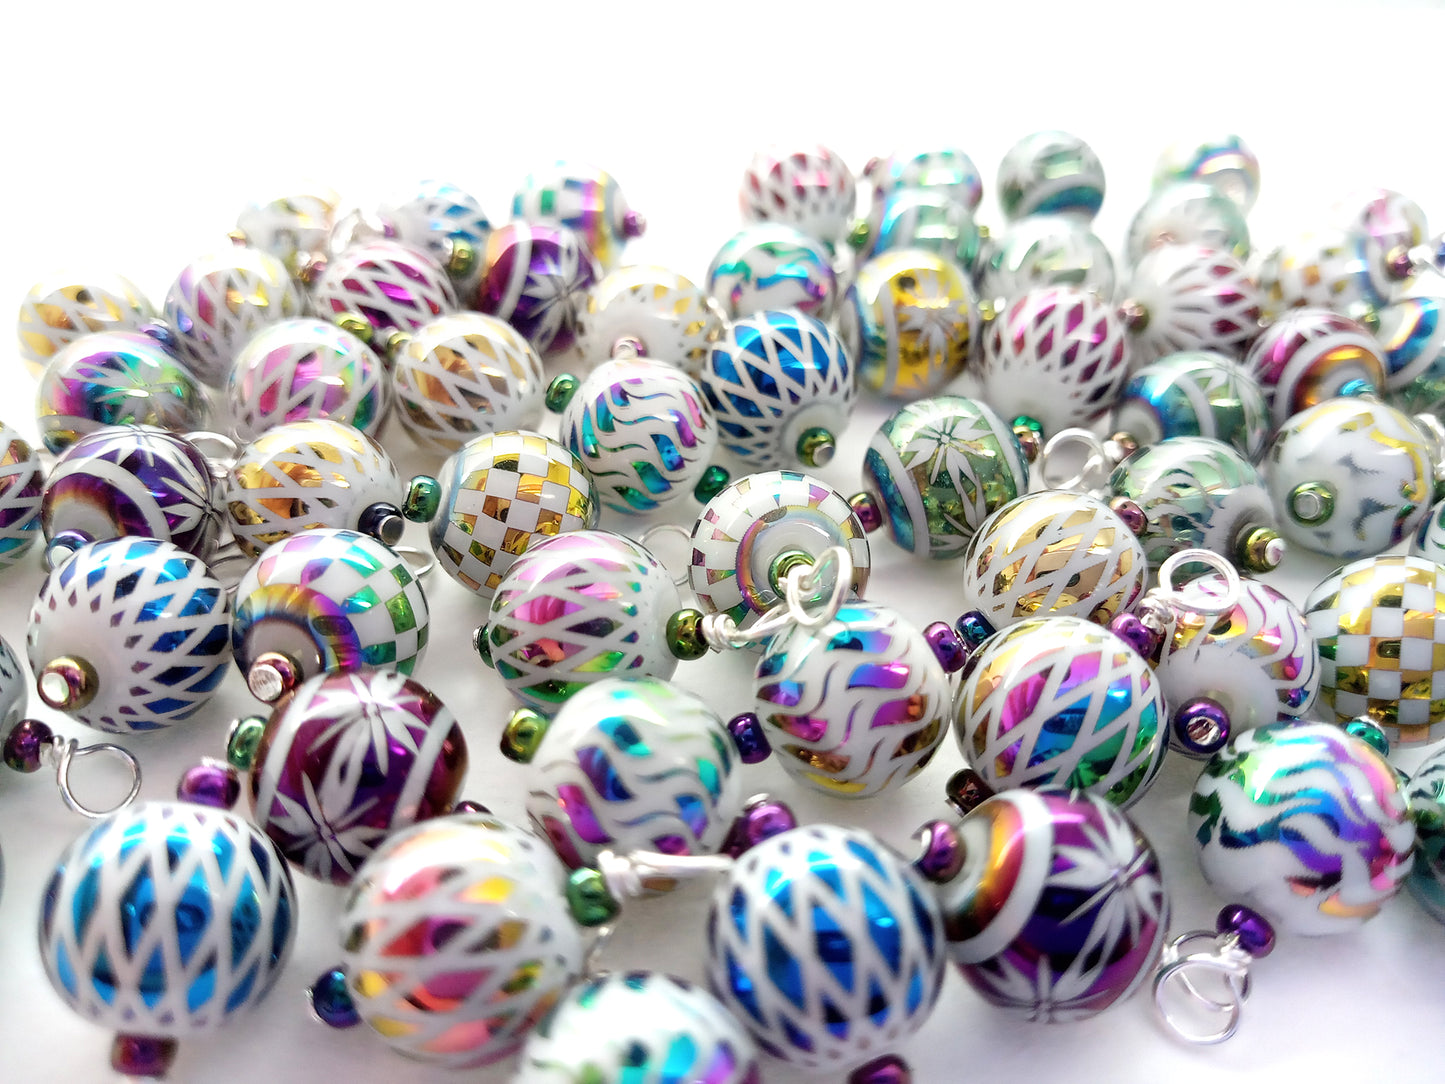 20 Tiny Christmas Ornaments, Glass Bauble Mix for 1:12 Scale or Dollhouse Trees